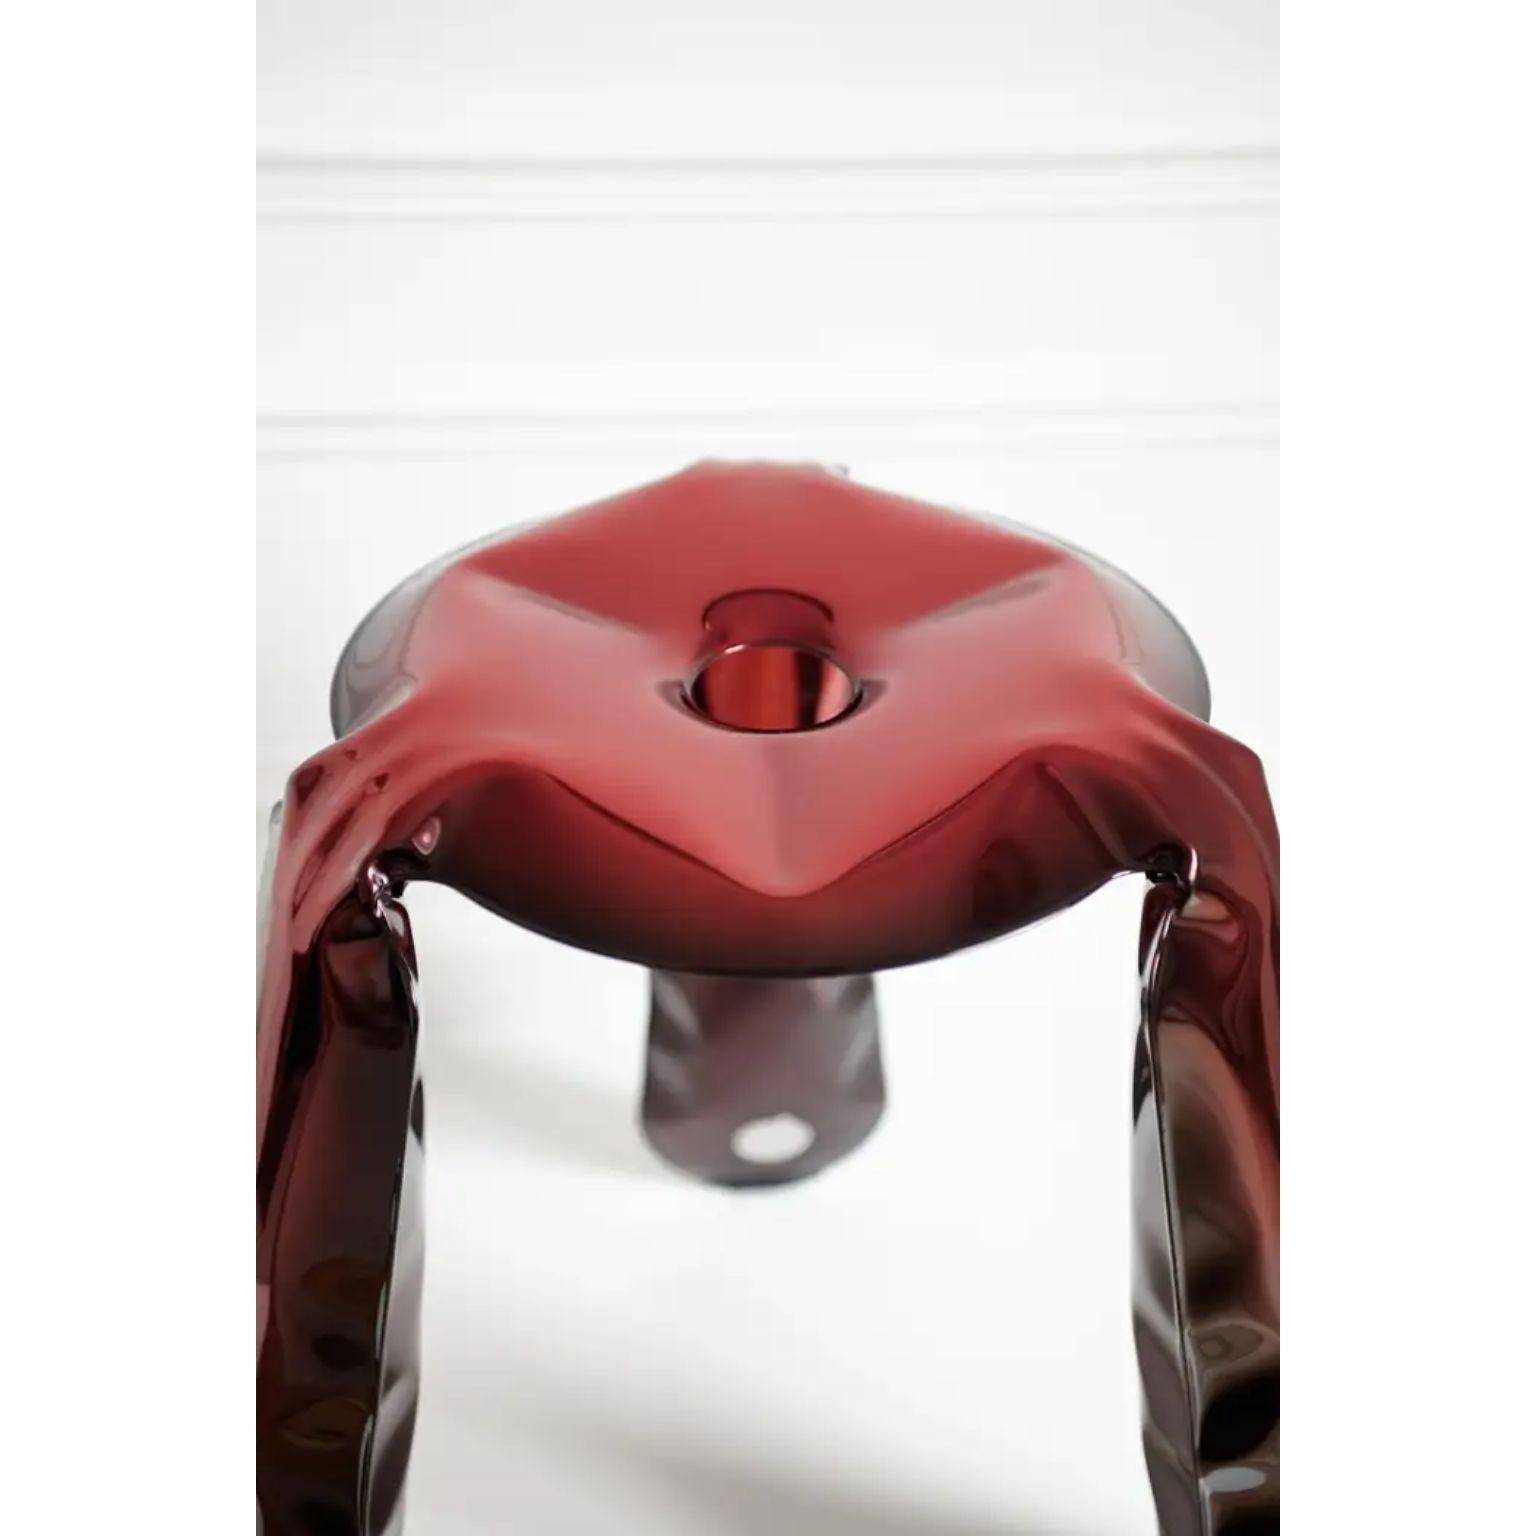 Rubin Red Standard Plopp Stool by Zieta
Dimensions: Ø 35 x H 50 cm.
Materials: Stainless steel.
Finish: Rubin red.

Available in different colors and finishes. Available in stainless steel, aluminum, and carbon steel. Also available in standard,